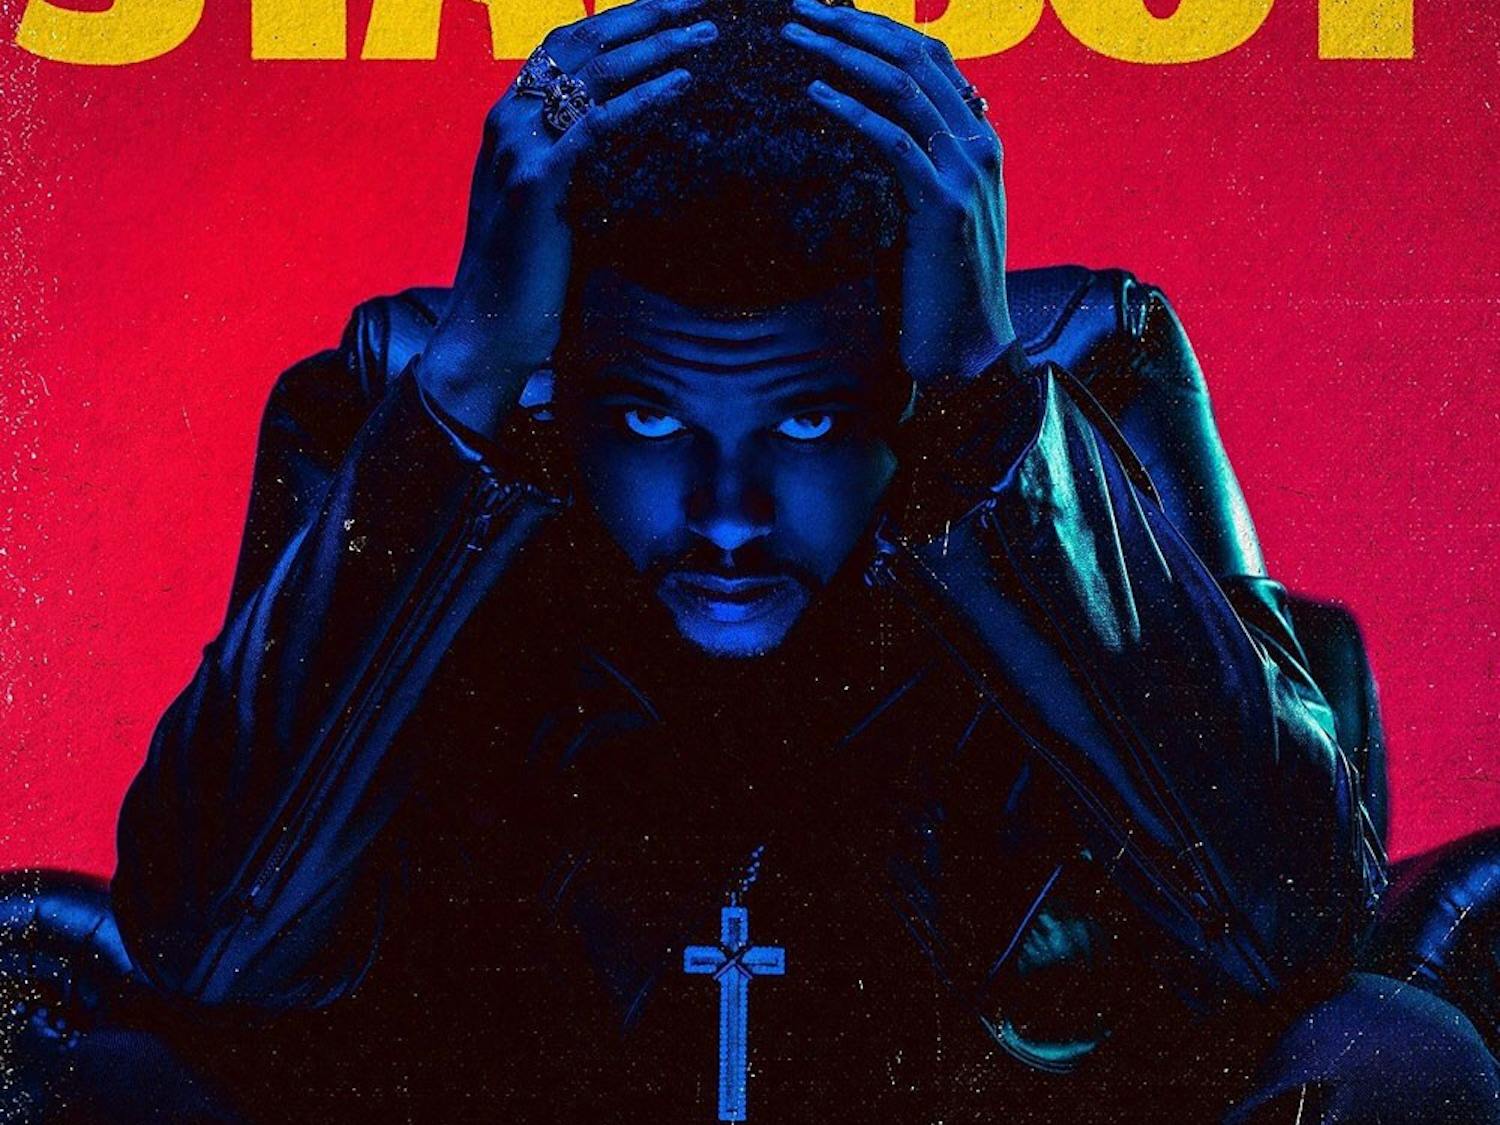 The Weeknd’s newest release Starboy is a dazzling step away from his traditional R&B sound. The 18-track album includes features from popular artists including Lana Del Rey, Daft Punk and Kendrick Lamar.